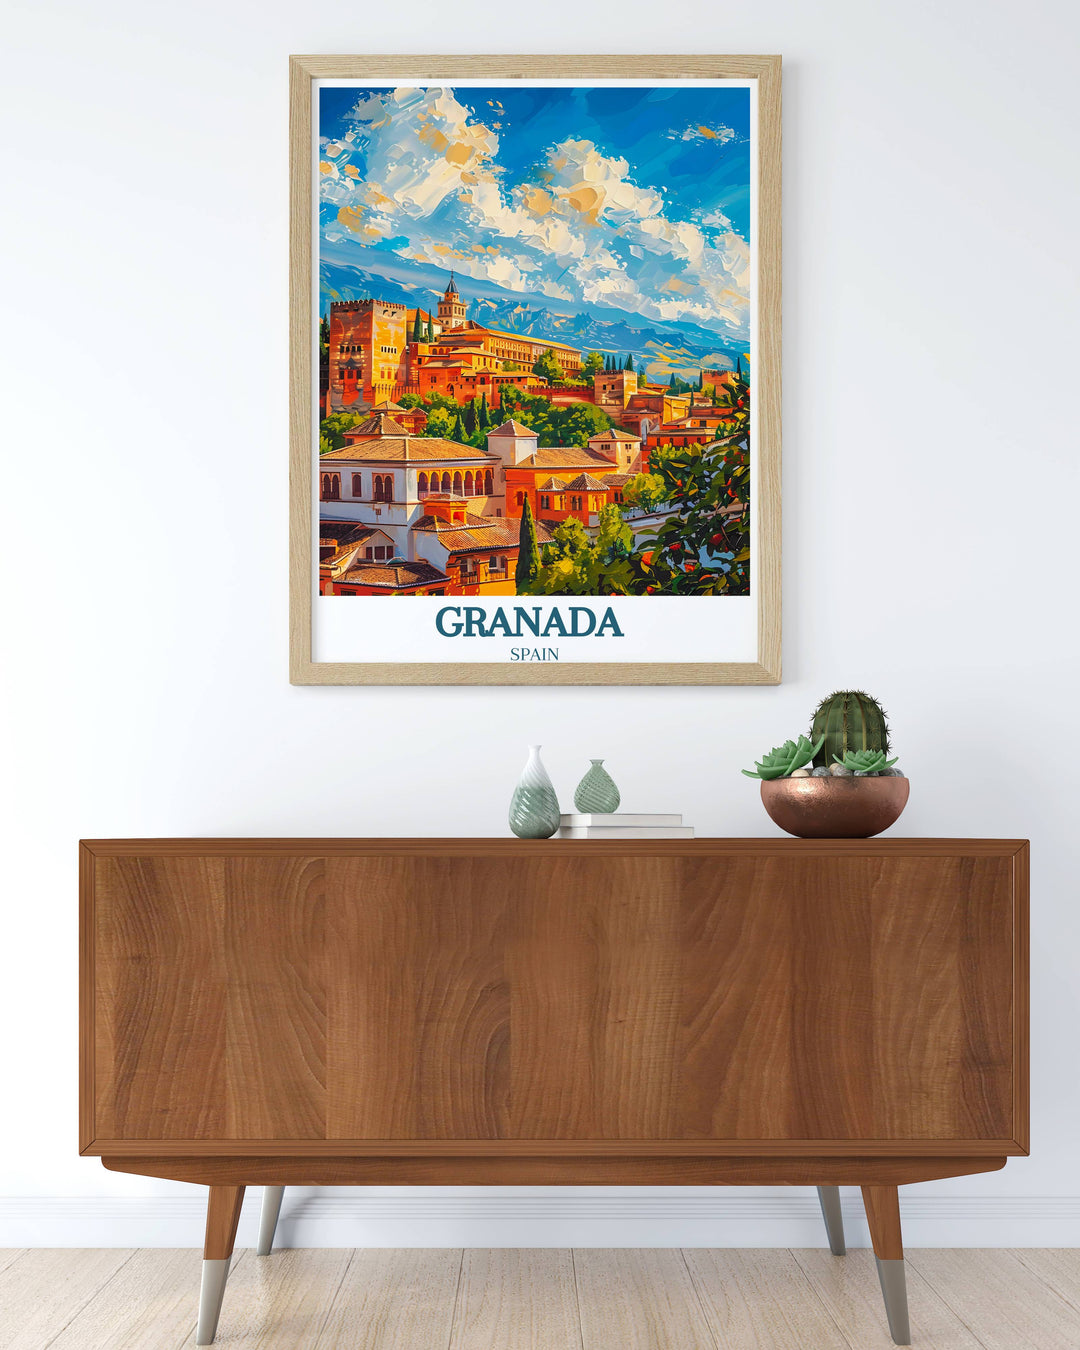 Immerse yourself in the allure of Granada with our exquisite Granada Artwork, capturing the essence of this vibrant Spanish destination.